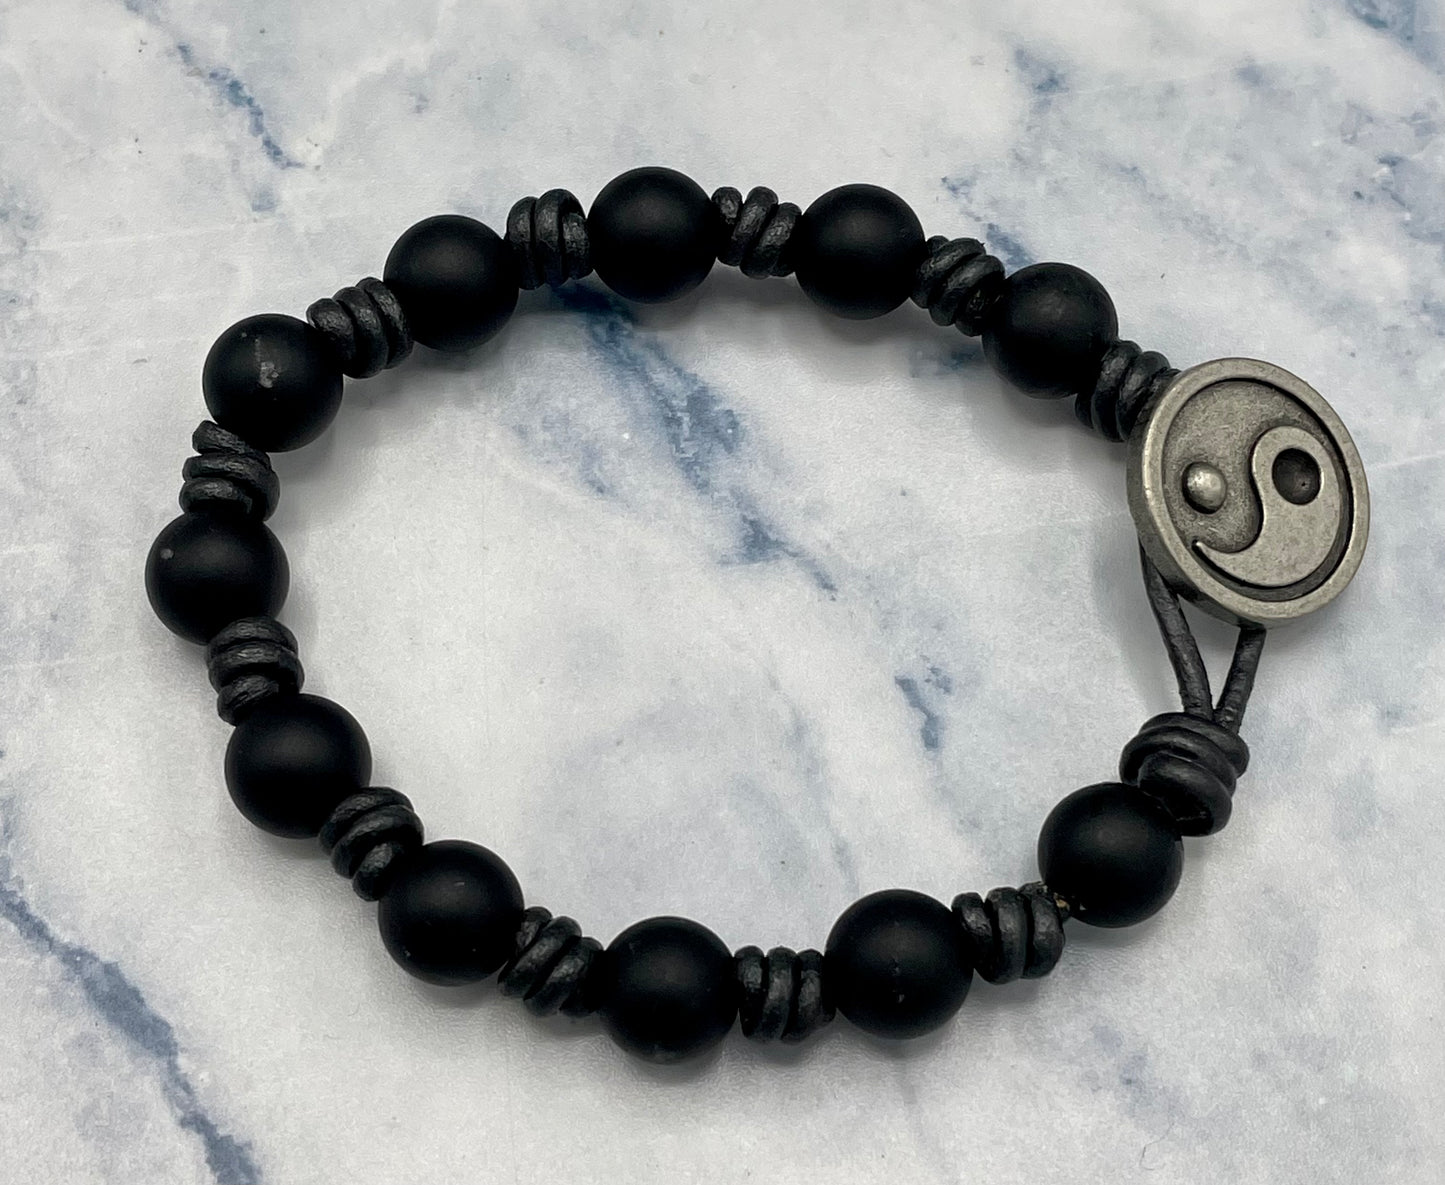 Black Onyx gemstone hand knotted Leather Bracelet with Yin Yang button clasp